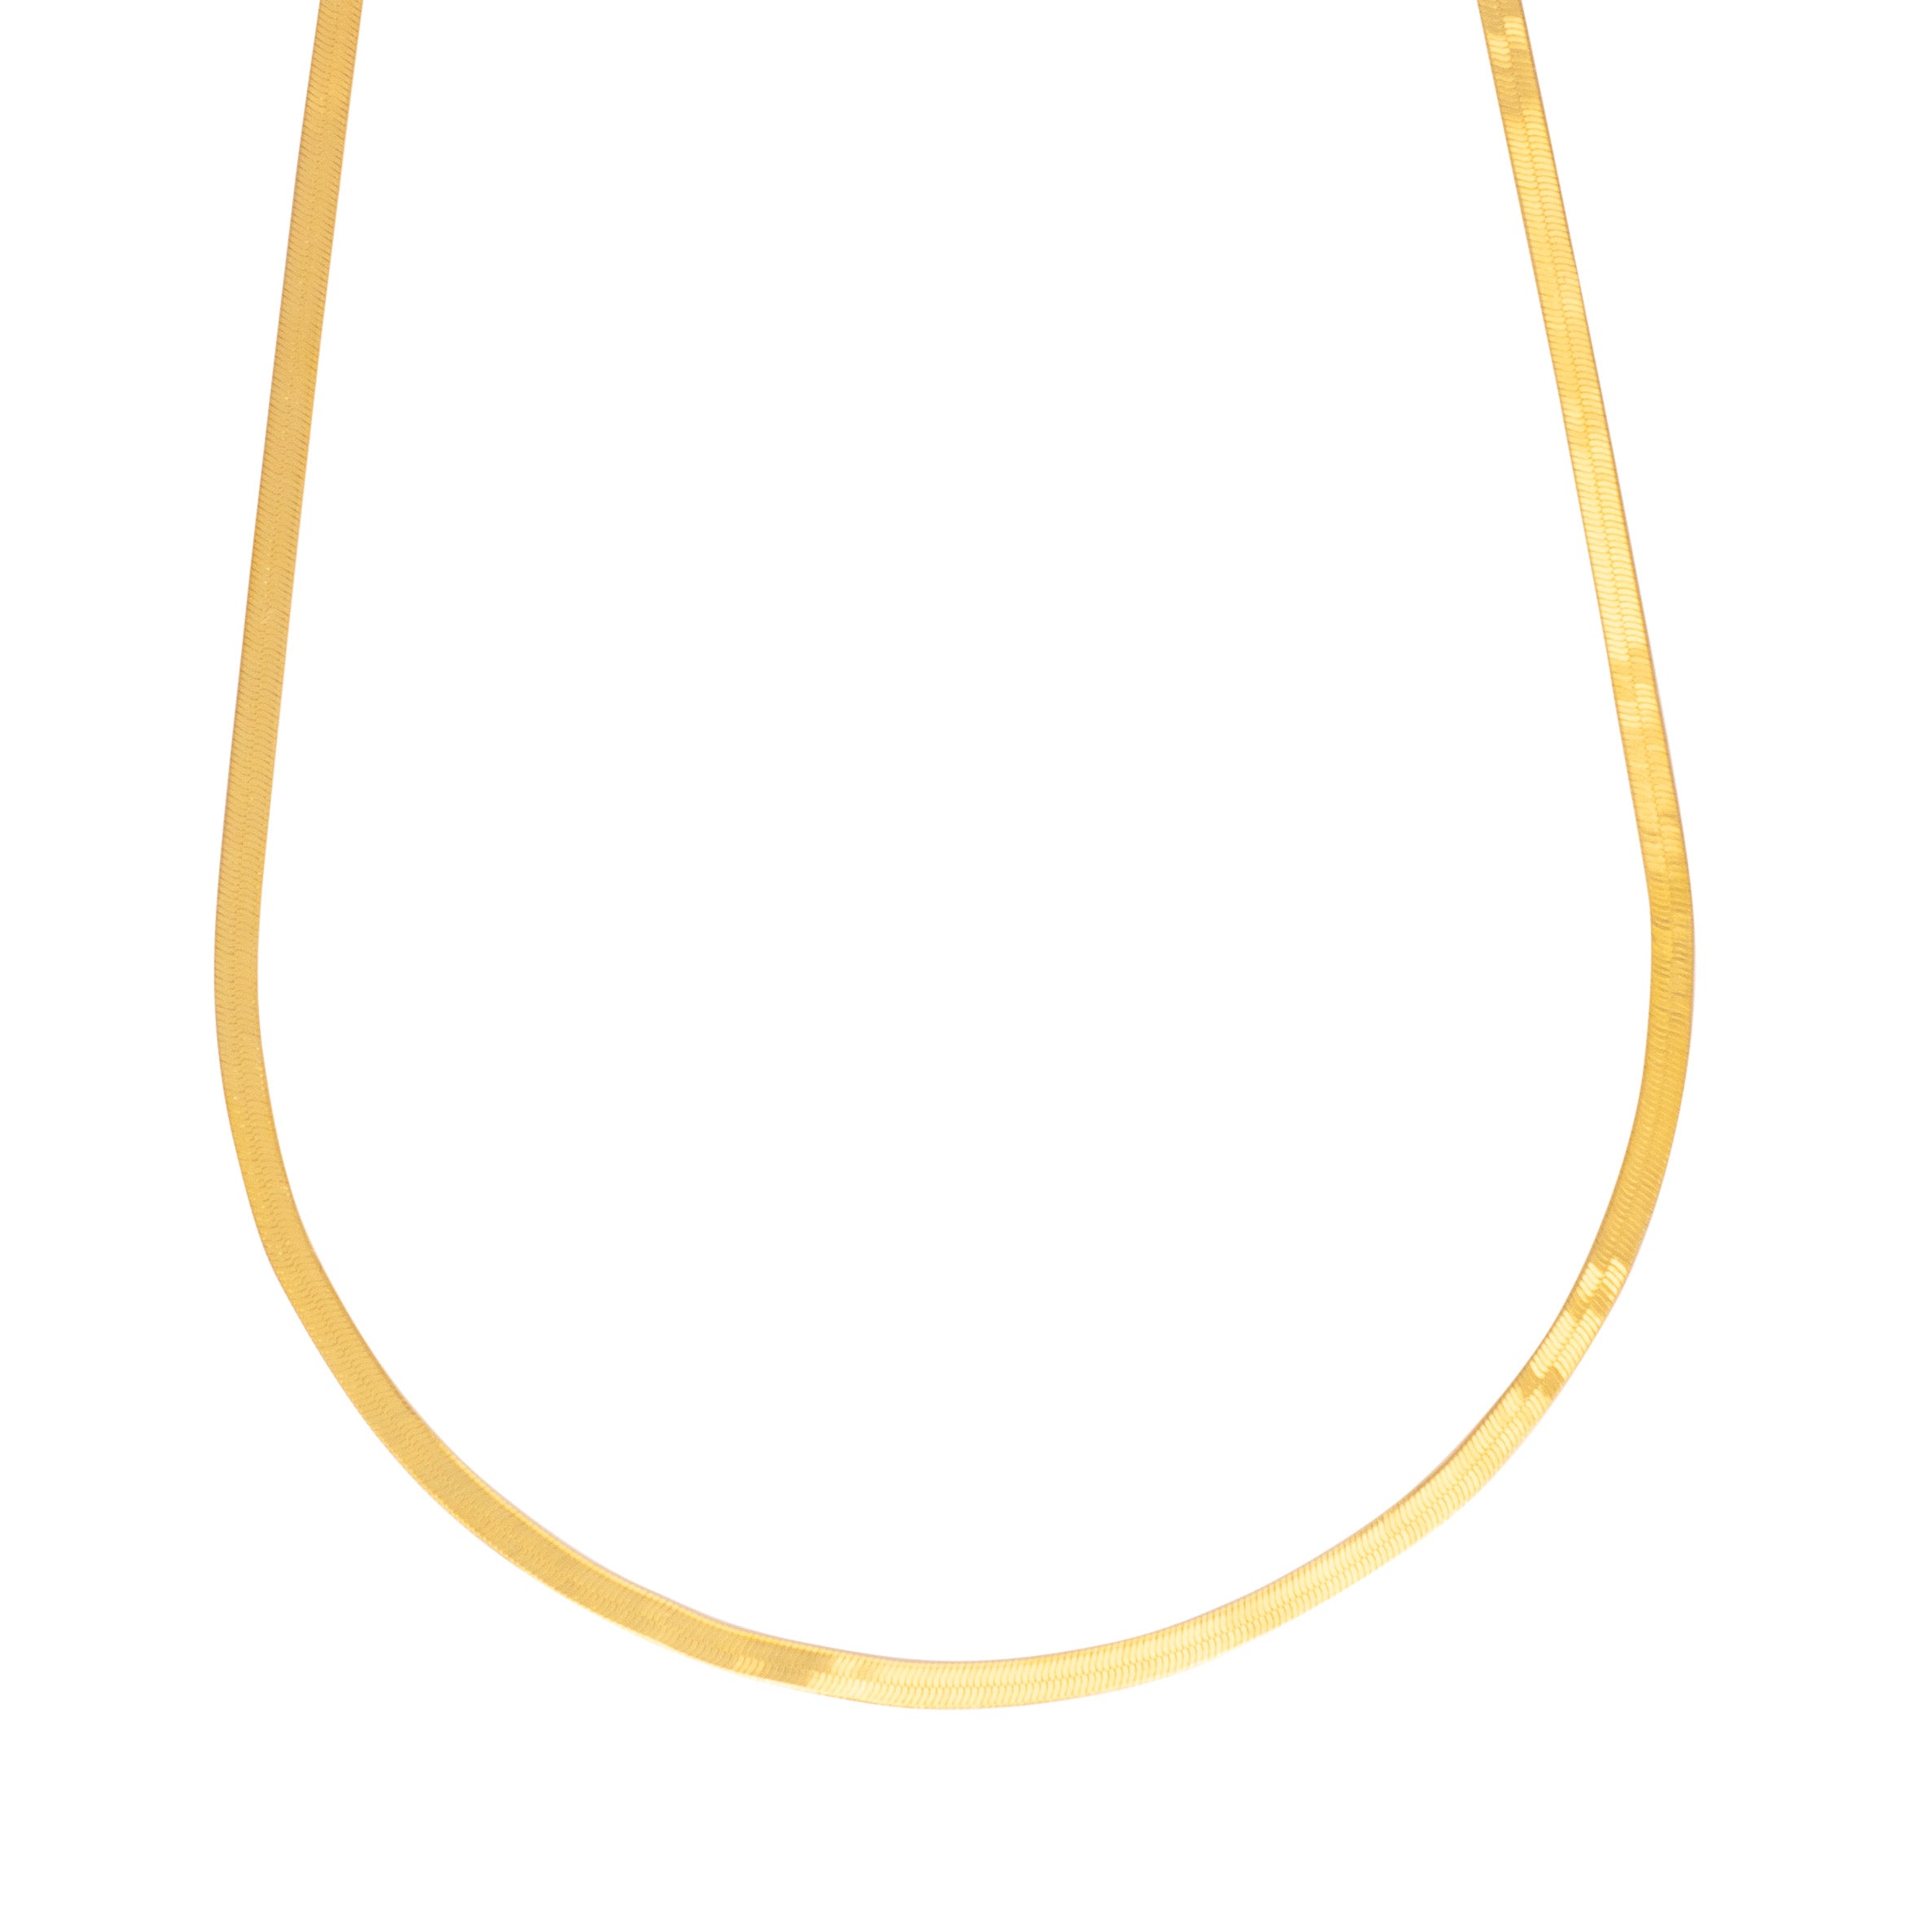 GOLD SNAKE CHAIN NECKLACE